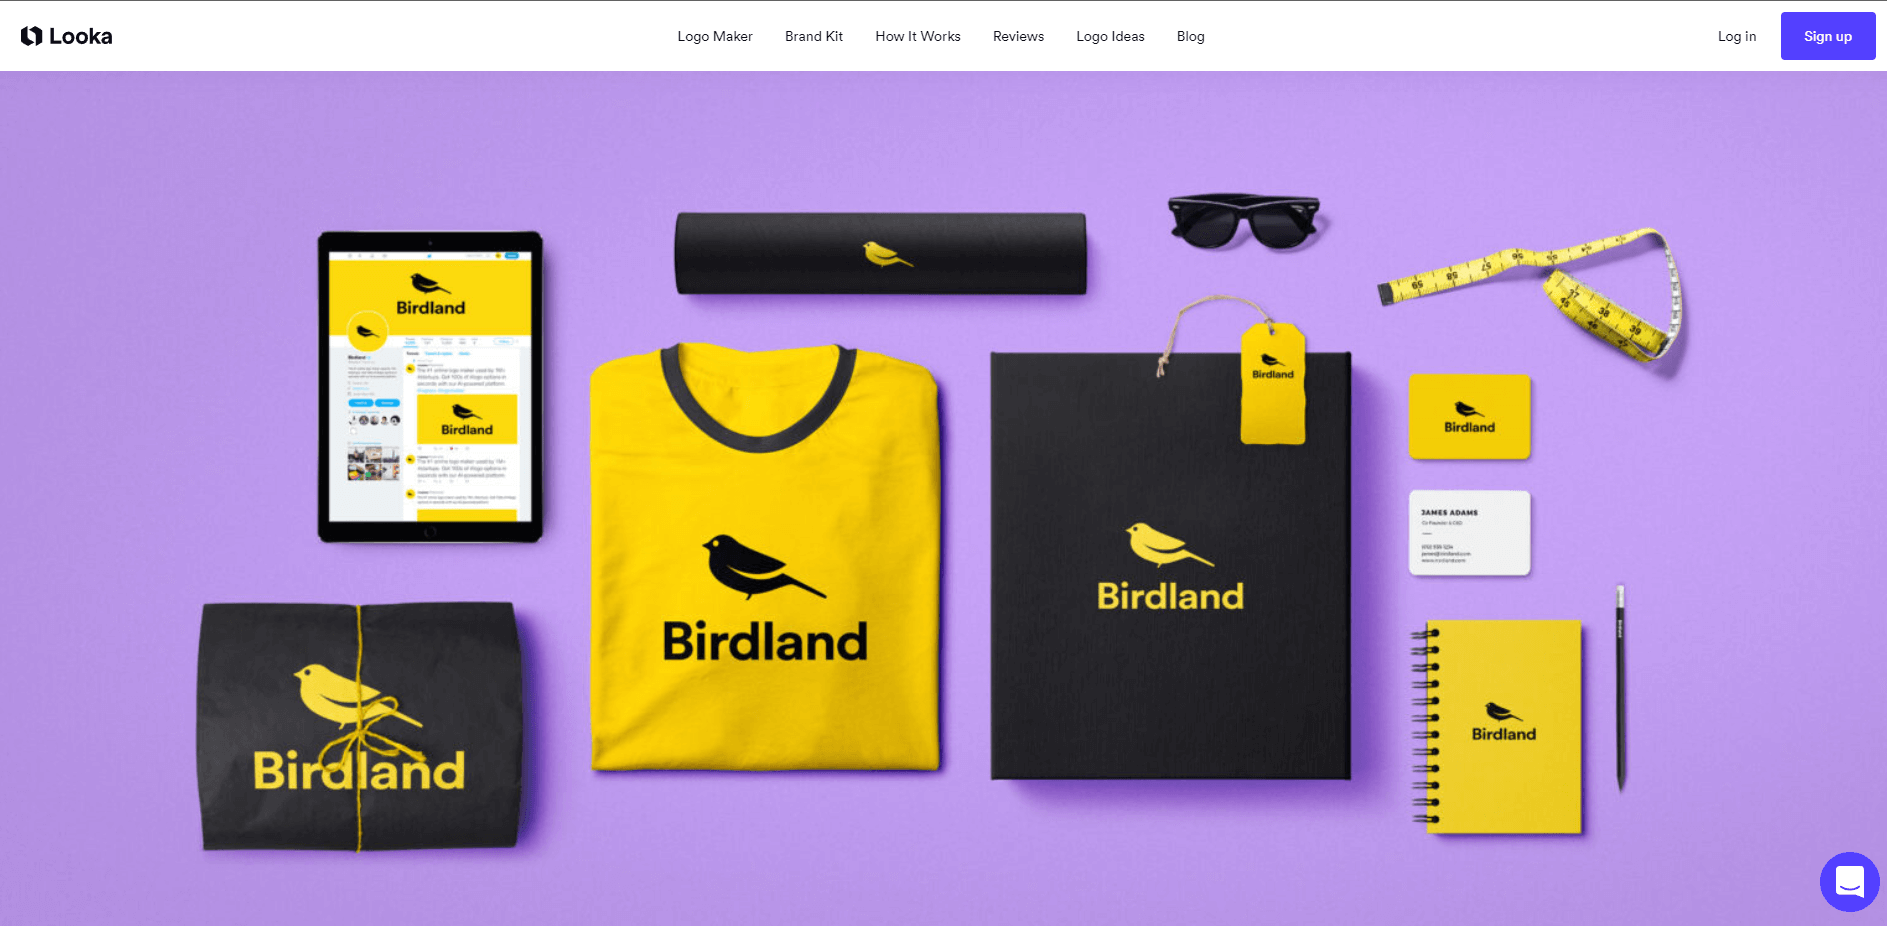 Looka’s homepage showing an example of an AI-generated brand kit